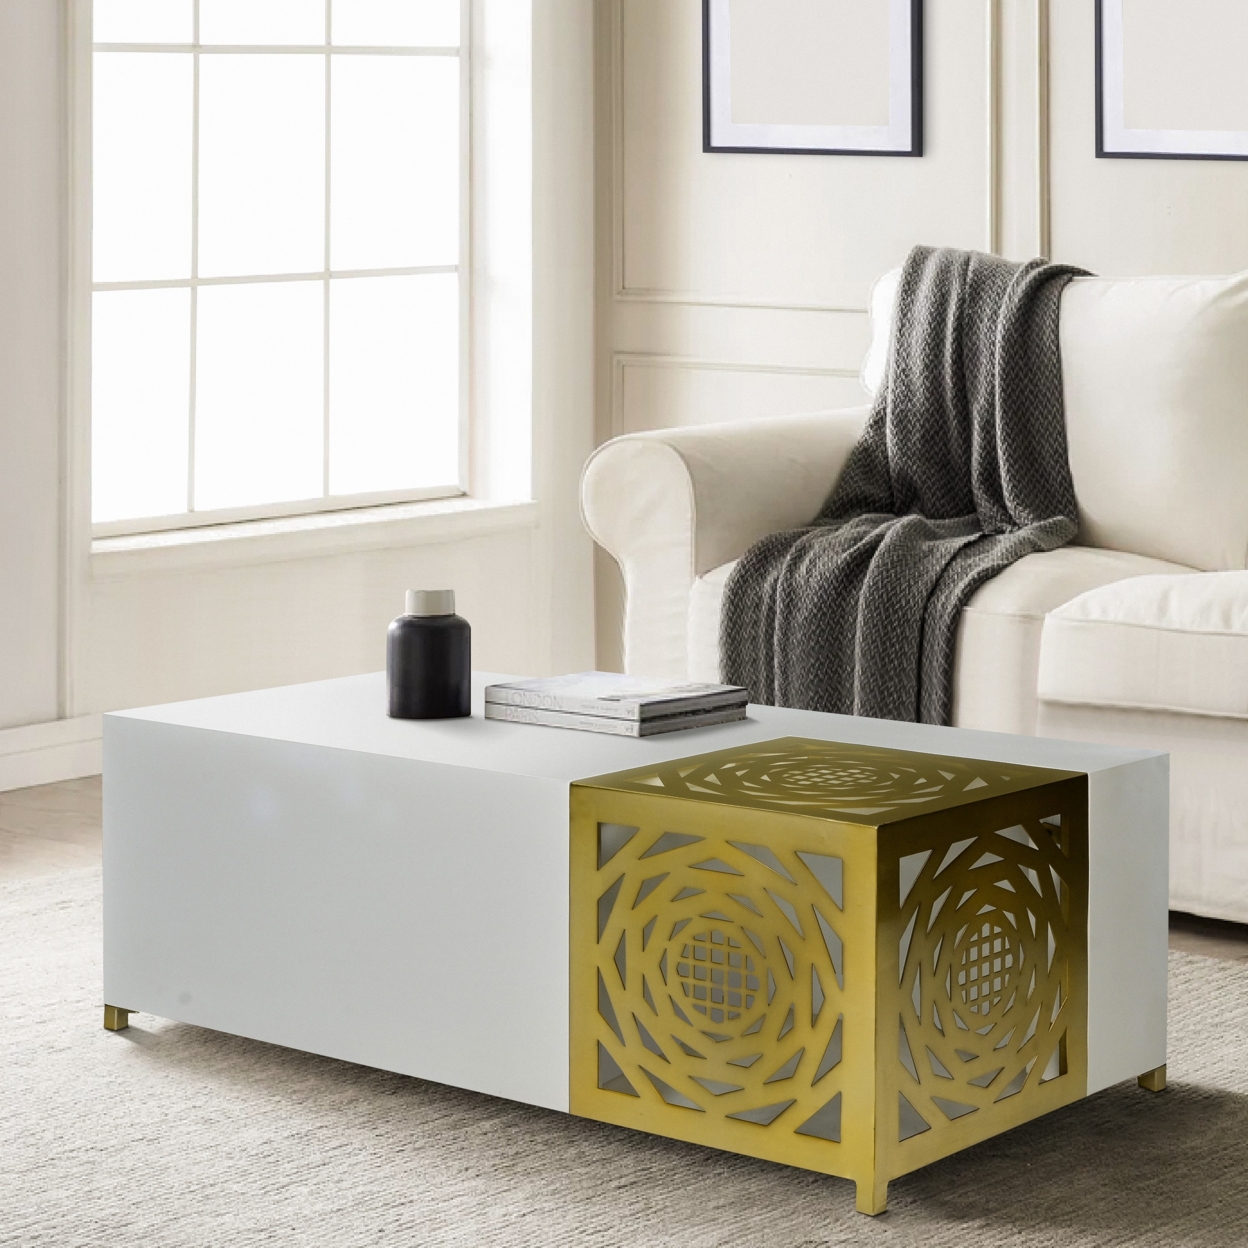 48 Inch Rectangular Modern Coffee Table With Geometric Cut Out Design, White And Brass- Saltoro Sherpi